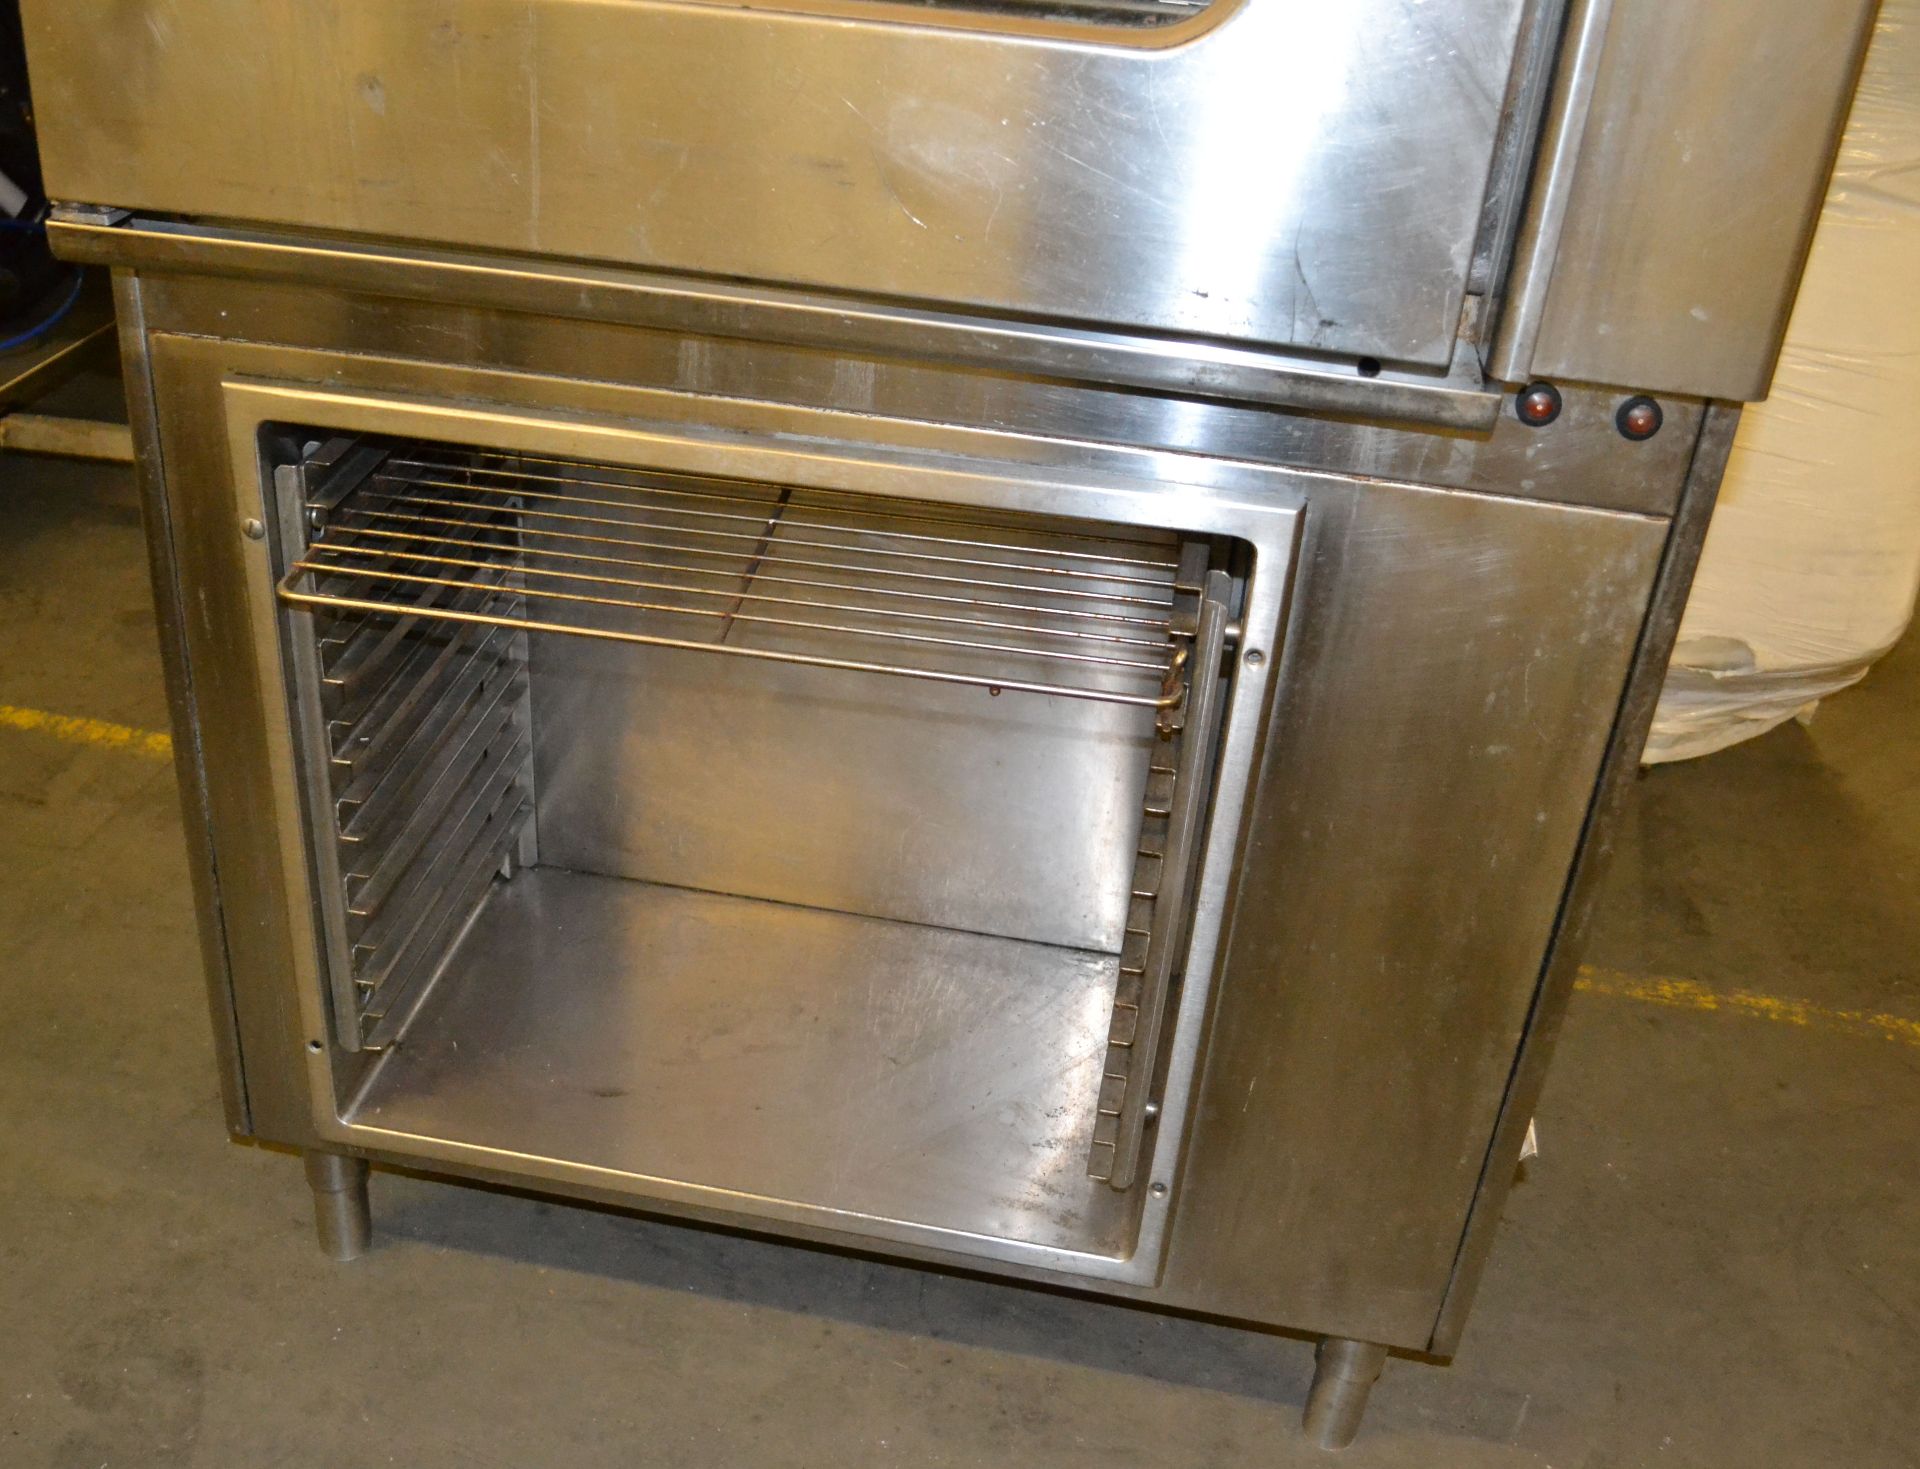 1 x Lainox MG110M LX Type Combination Oven with Pan Capacity - Ref:NCE032 - CL007 - Location: Bolton - Image 6 of 15